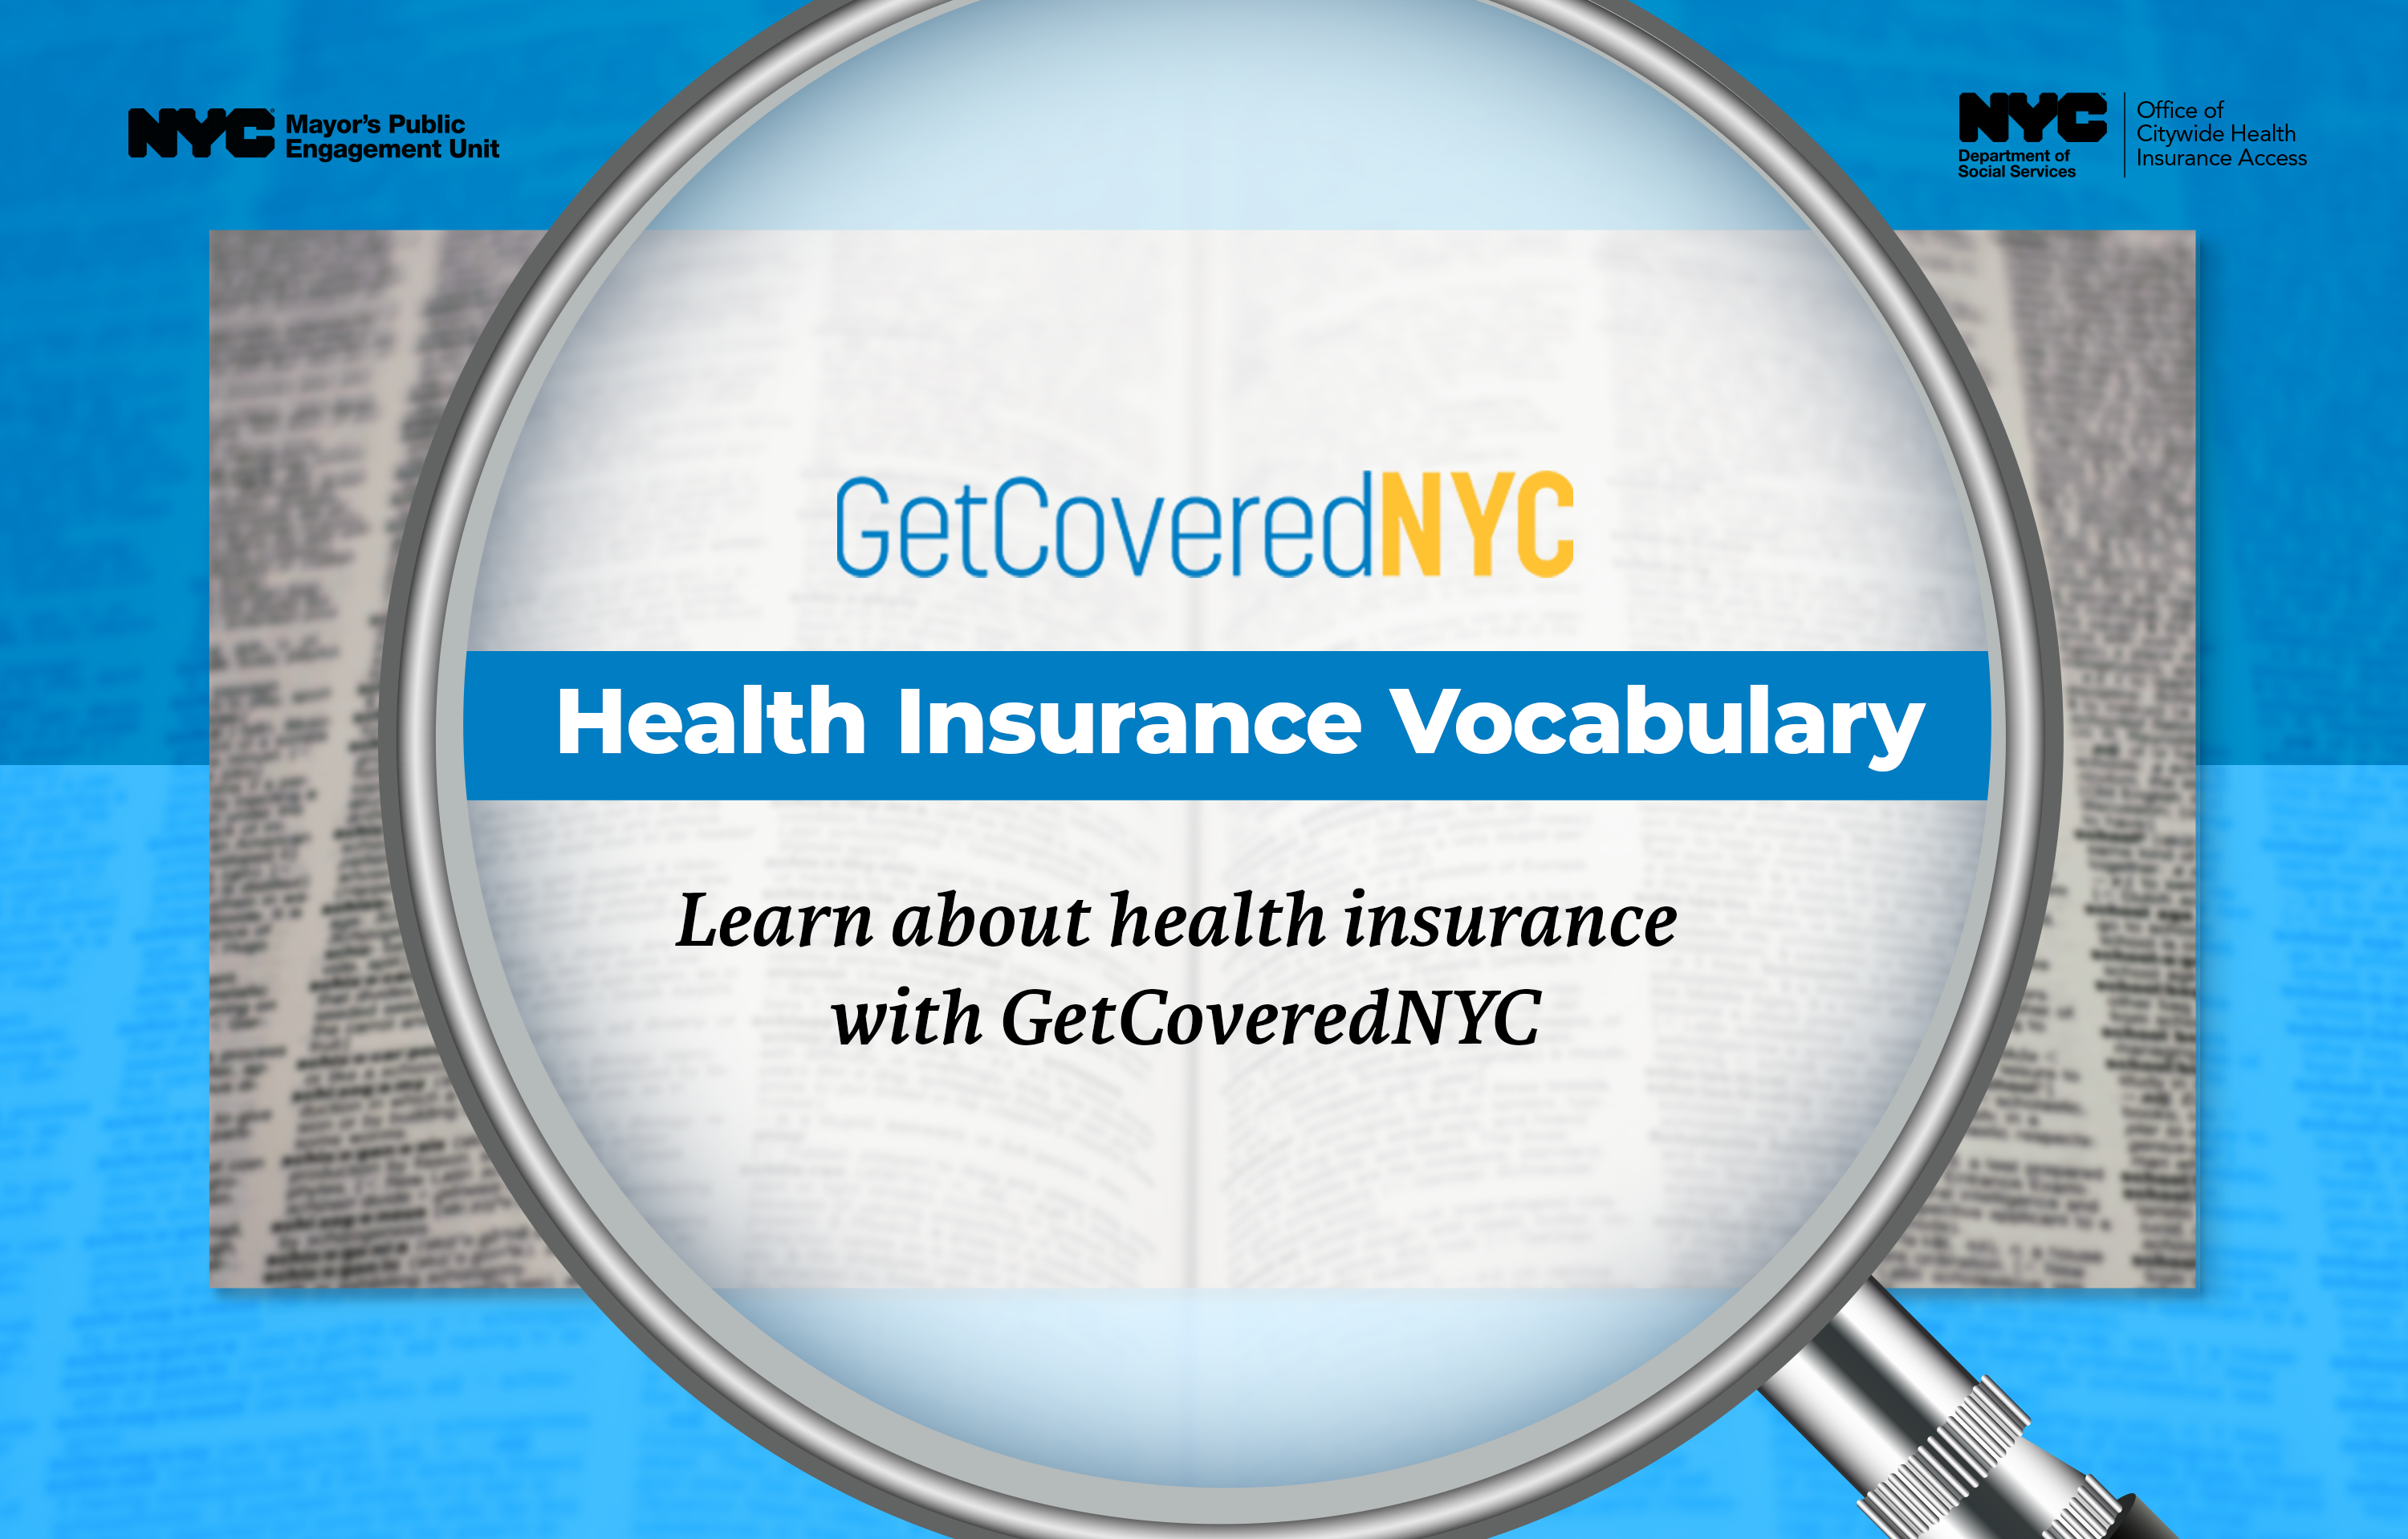 Health Insurance Vocab: Learn more about health insurance from GetCoveredNYC
                                           